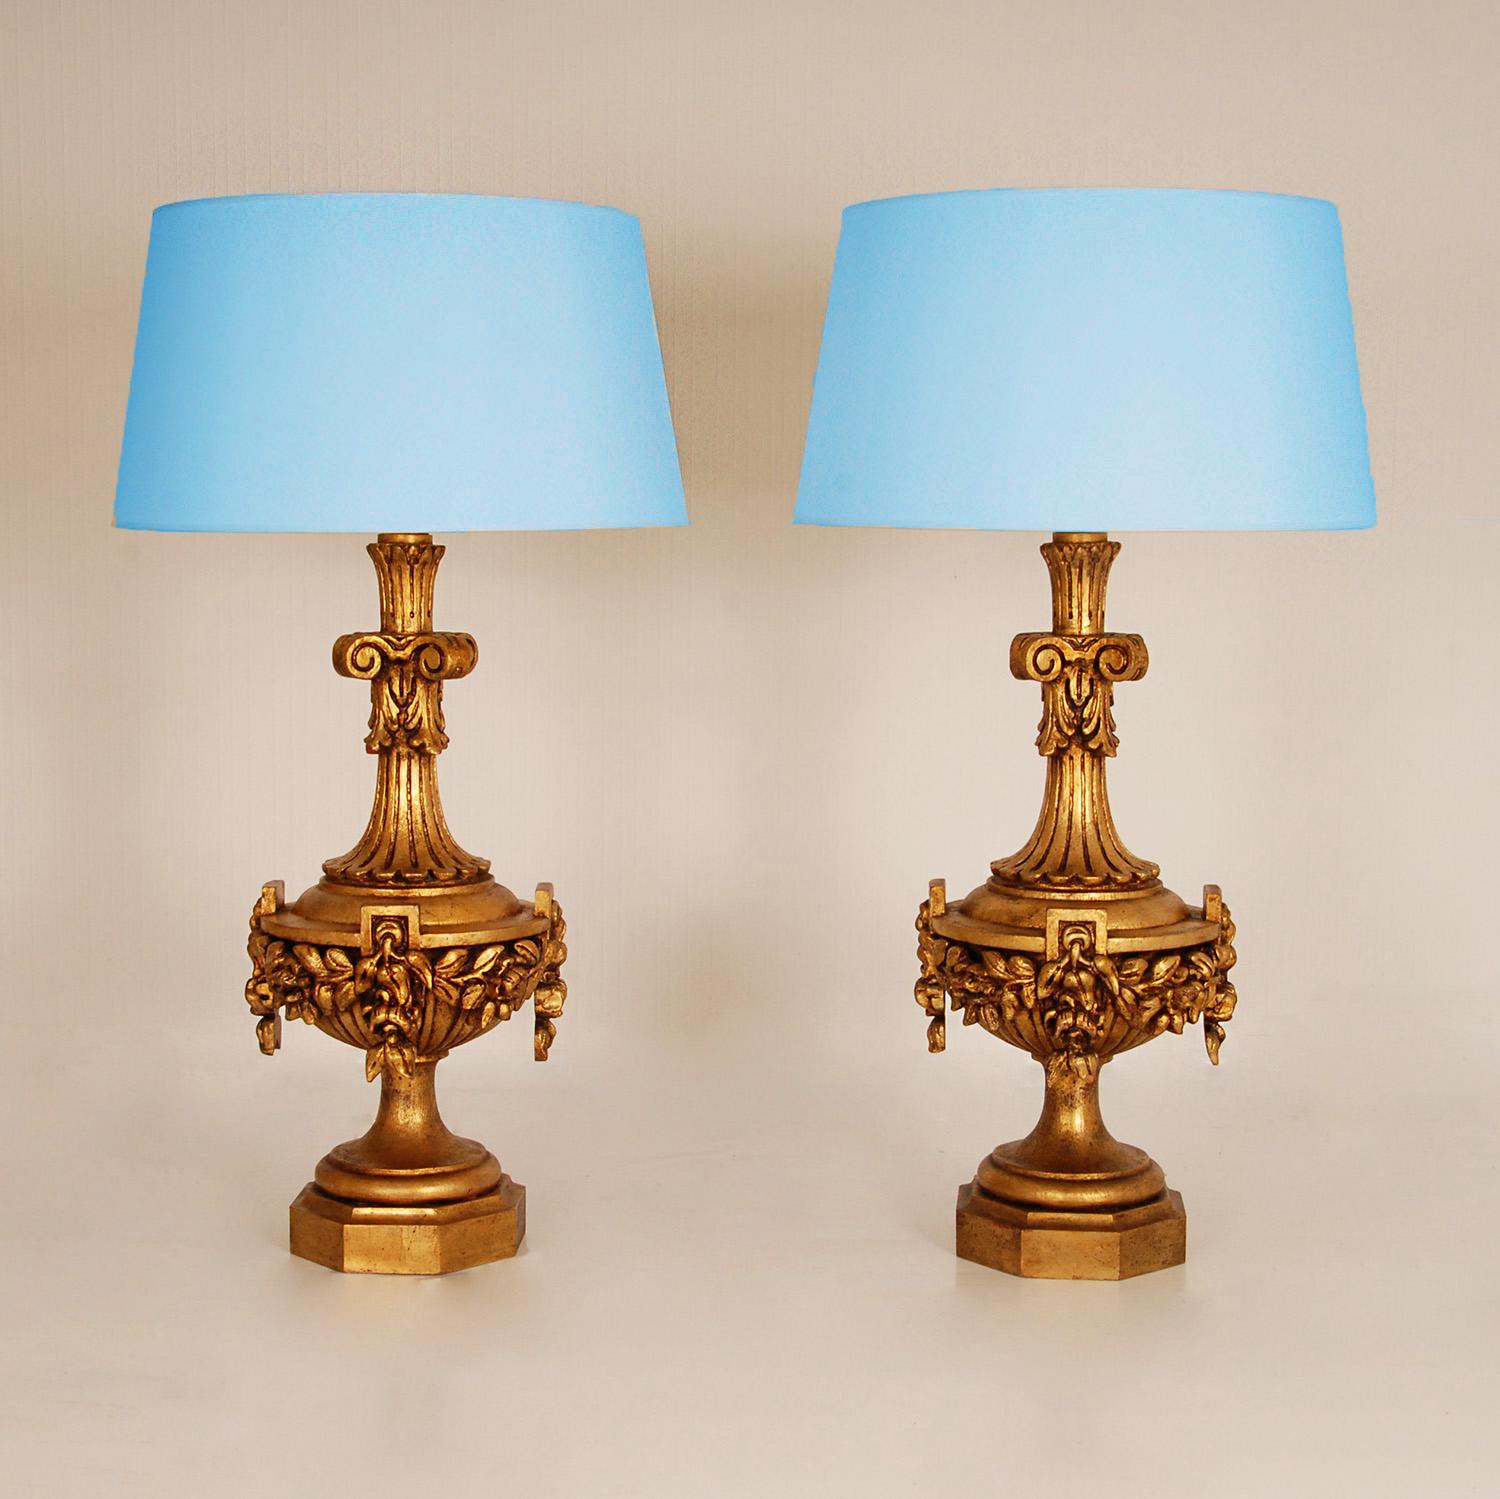 Vintage tall ornamental Italian Giltwood Lamps hand carved Neoclassical table lamps with lampshades.
Style: Vintage, Italian, French Country, French Provincial, Baroque, Antique, Mid Century, Neoclassical, Regency, Art deco
Material: wood, gold